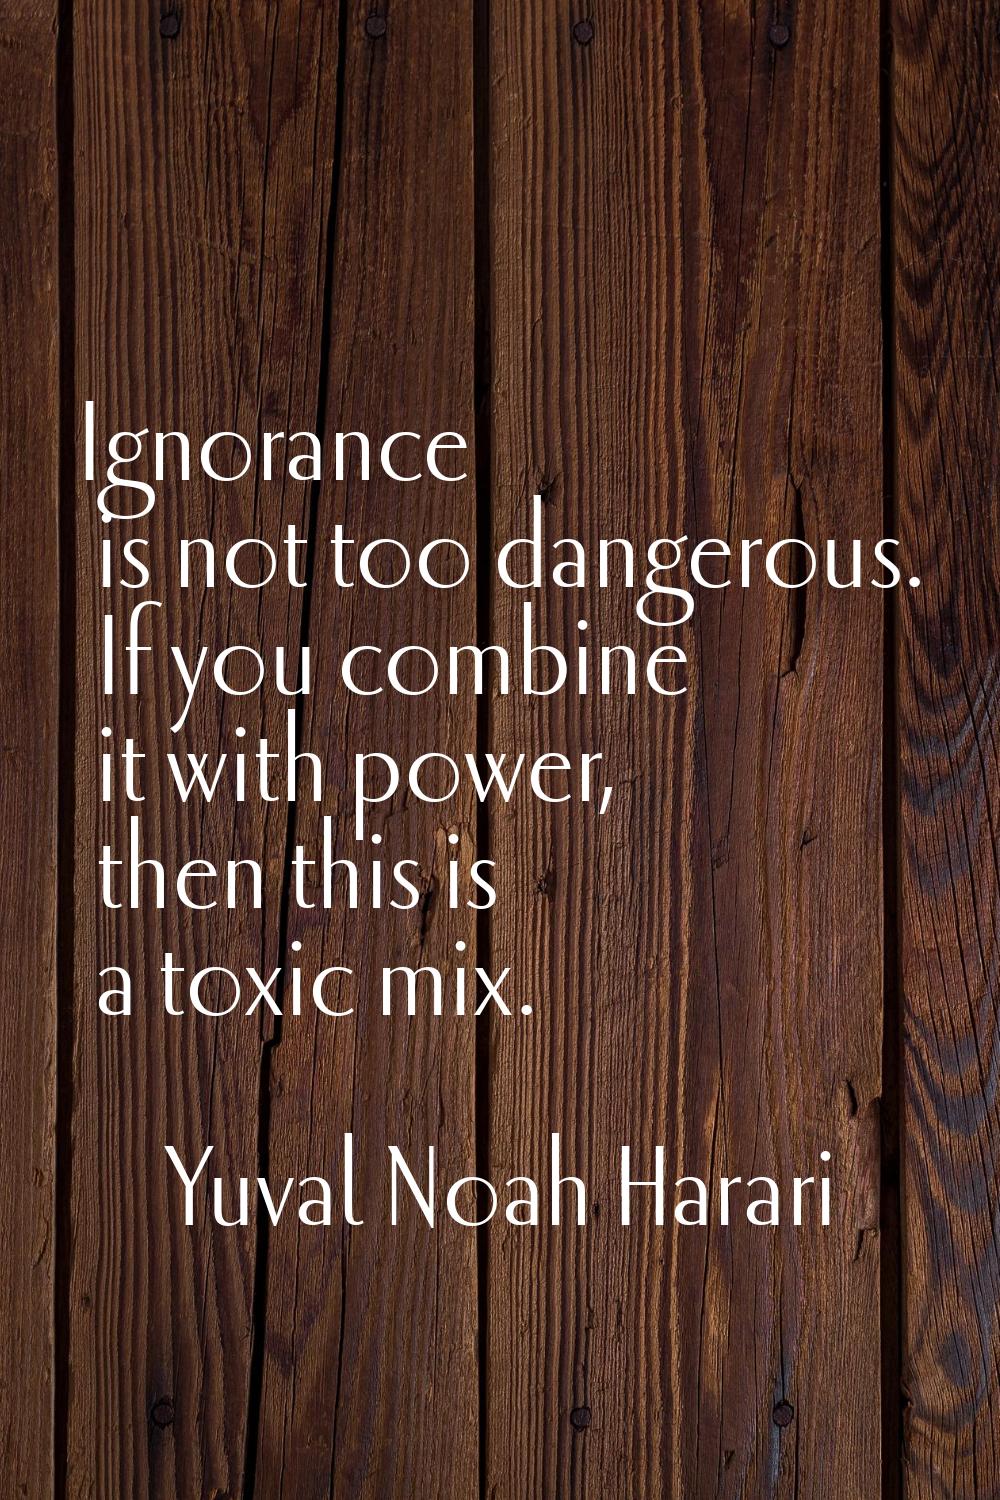 Ignorance is not too dangerous. If you combine it with power, then this is a toxic mix.